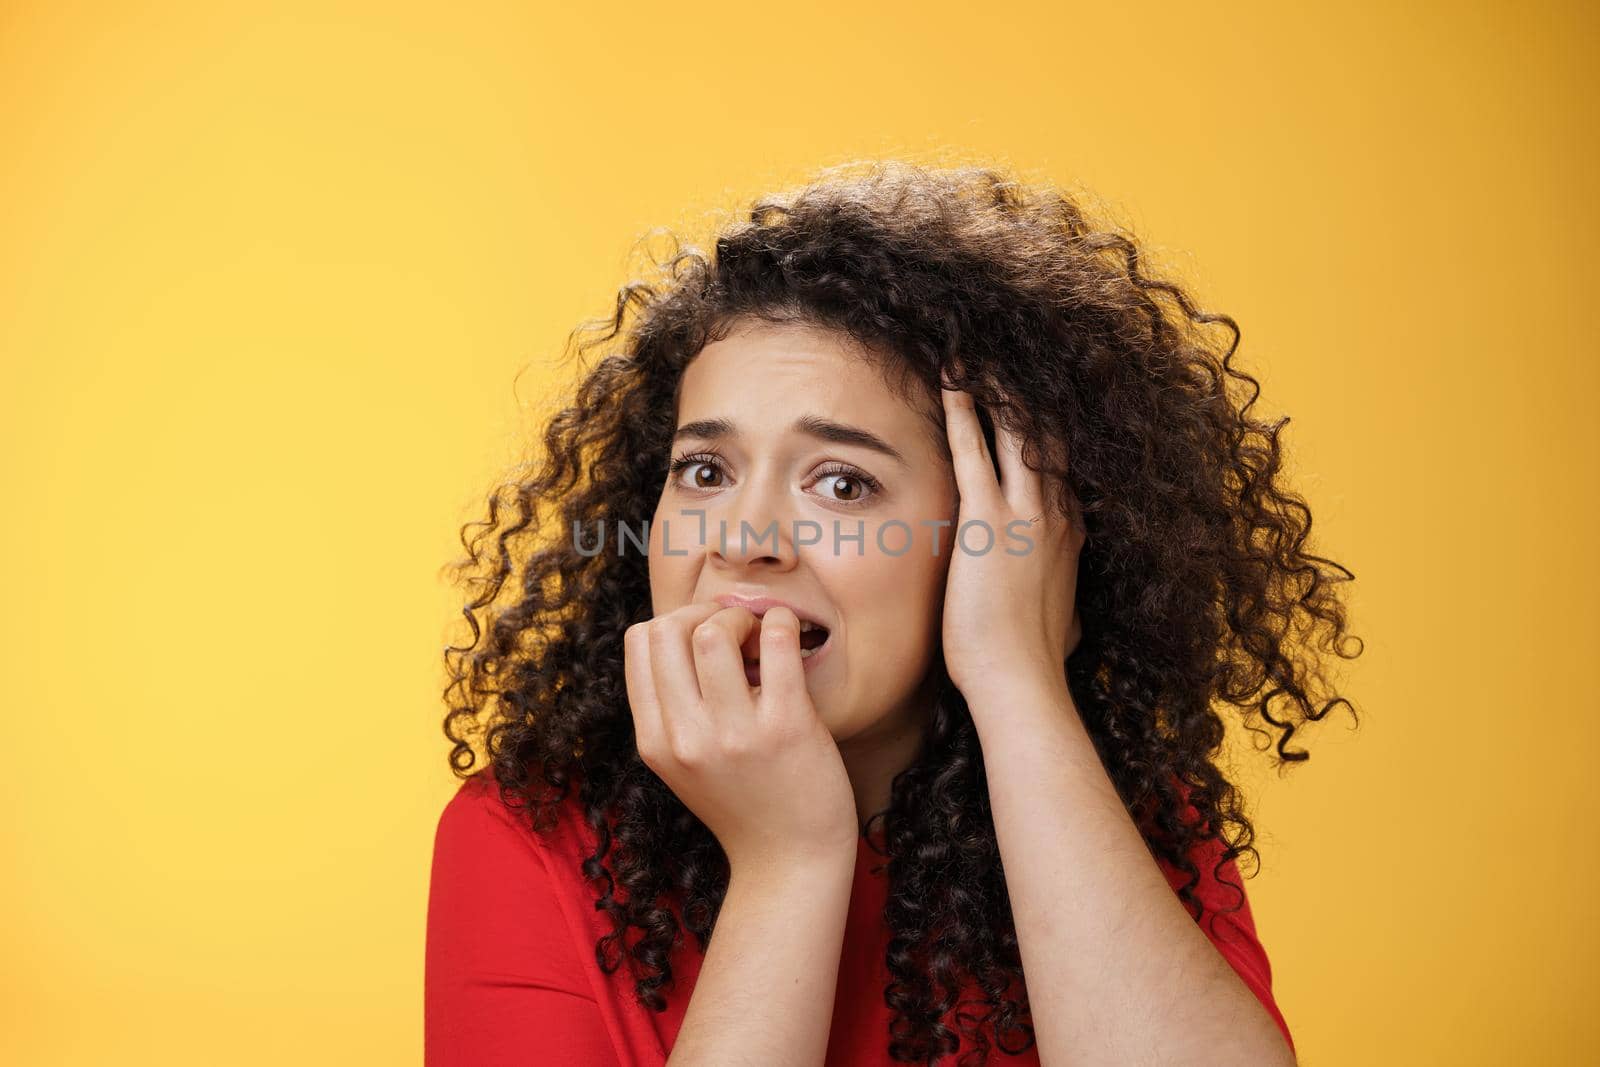 Scared woman overthinking frightened being in trouble biting fingers holding hand on head in despair, standing concerned, panicking and feeling uneasy as standing over yellow background. Emotions, facial expressions concept